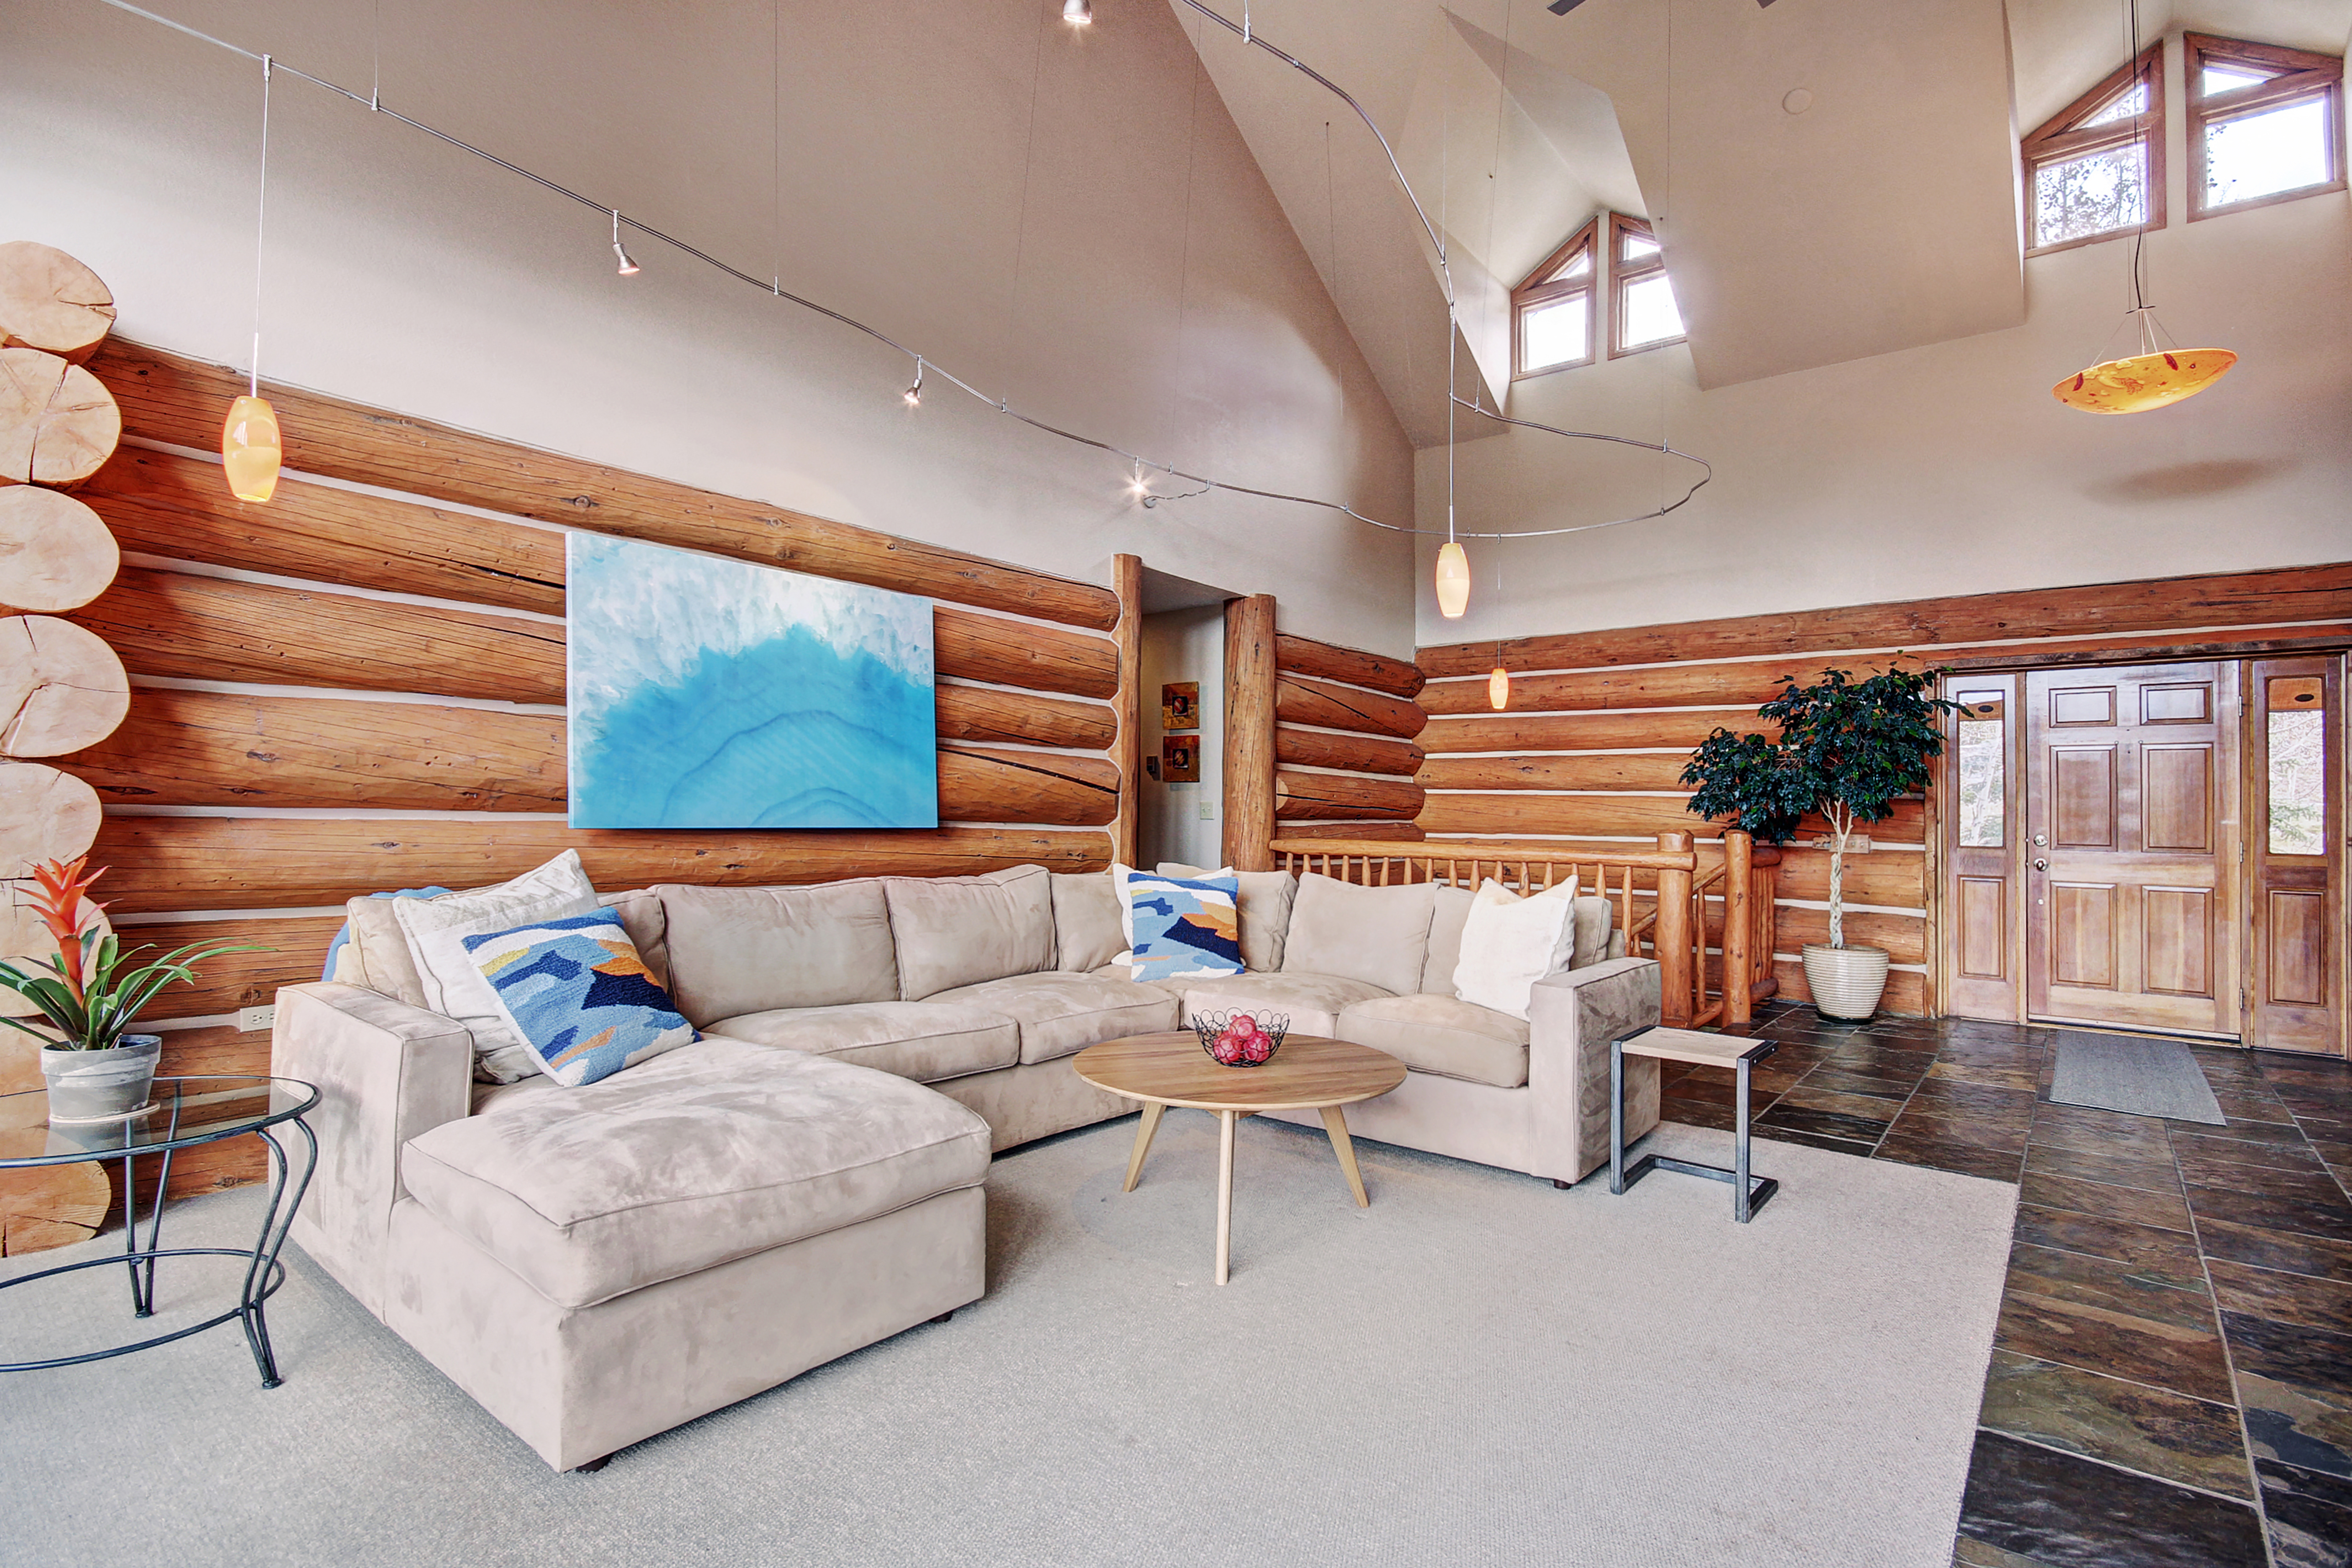 The large sectional sofa allows space for everyone in the spacious living room - 10 Southface Breckenridge Vacation Rental